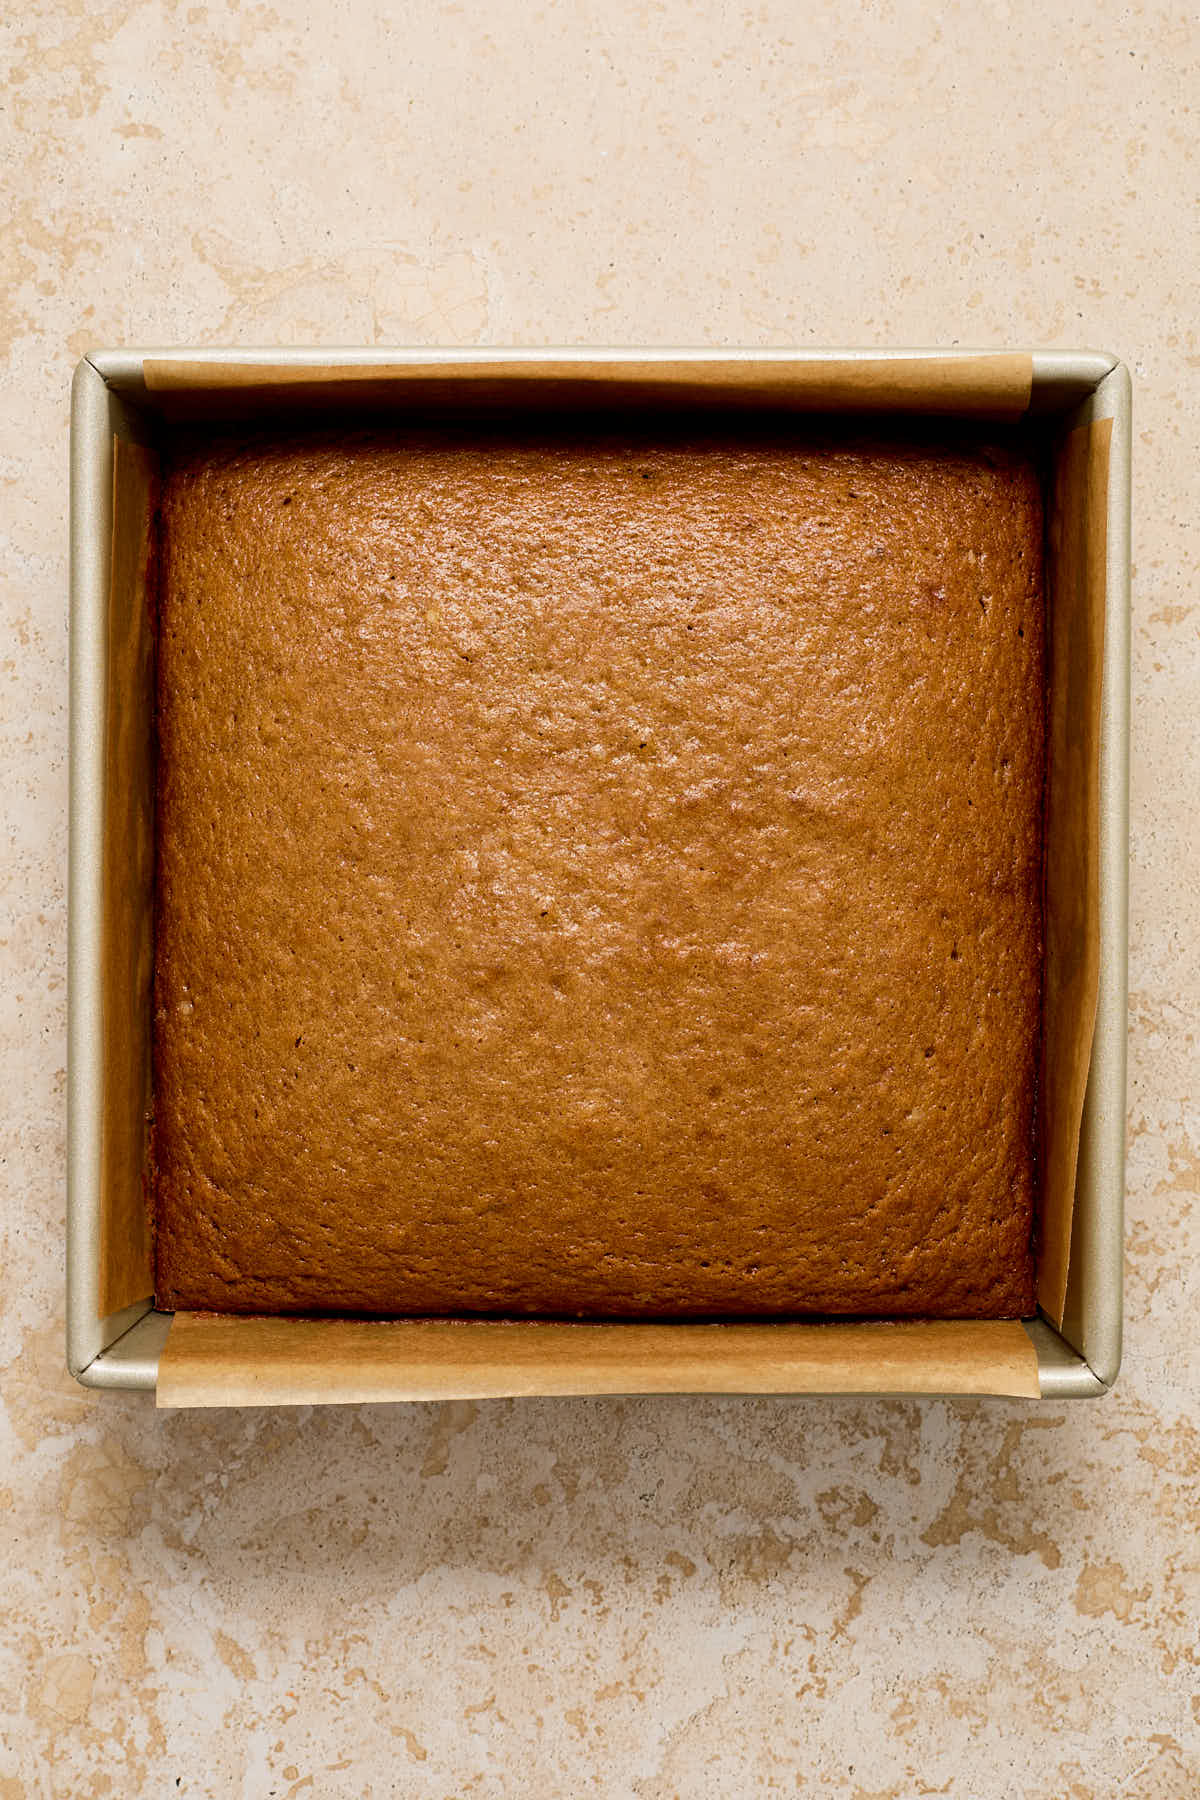 Cake baked up in a square pan.